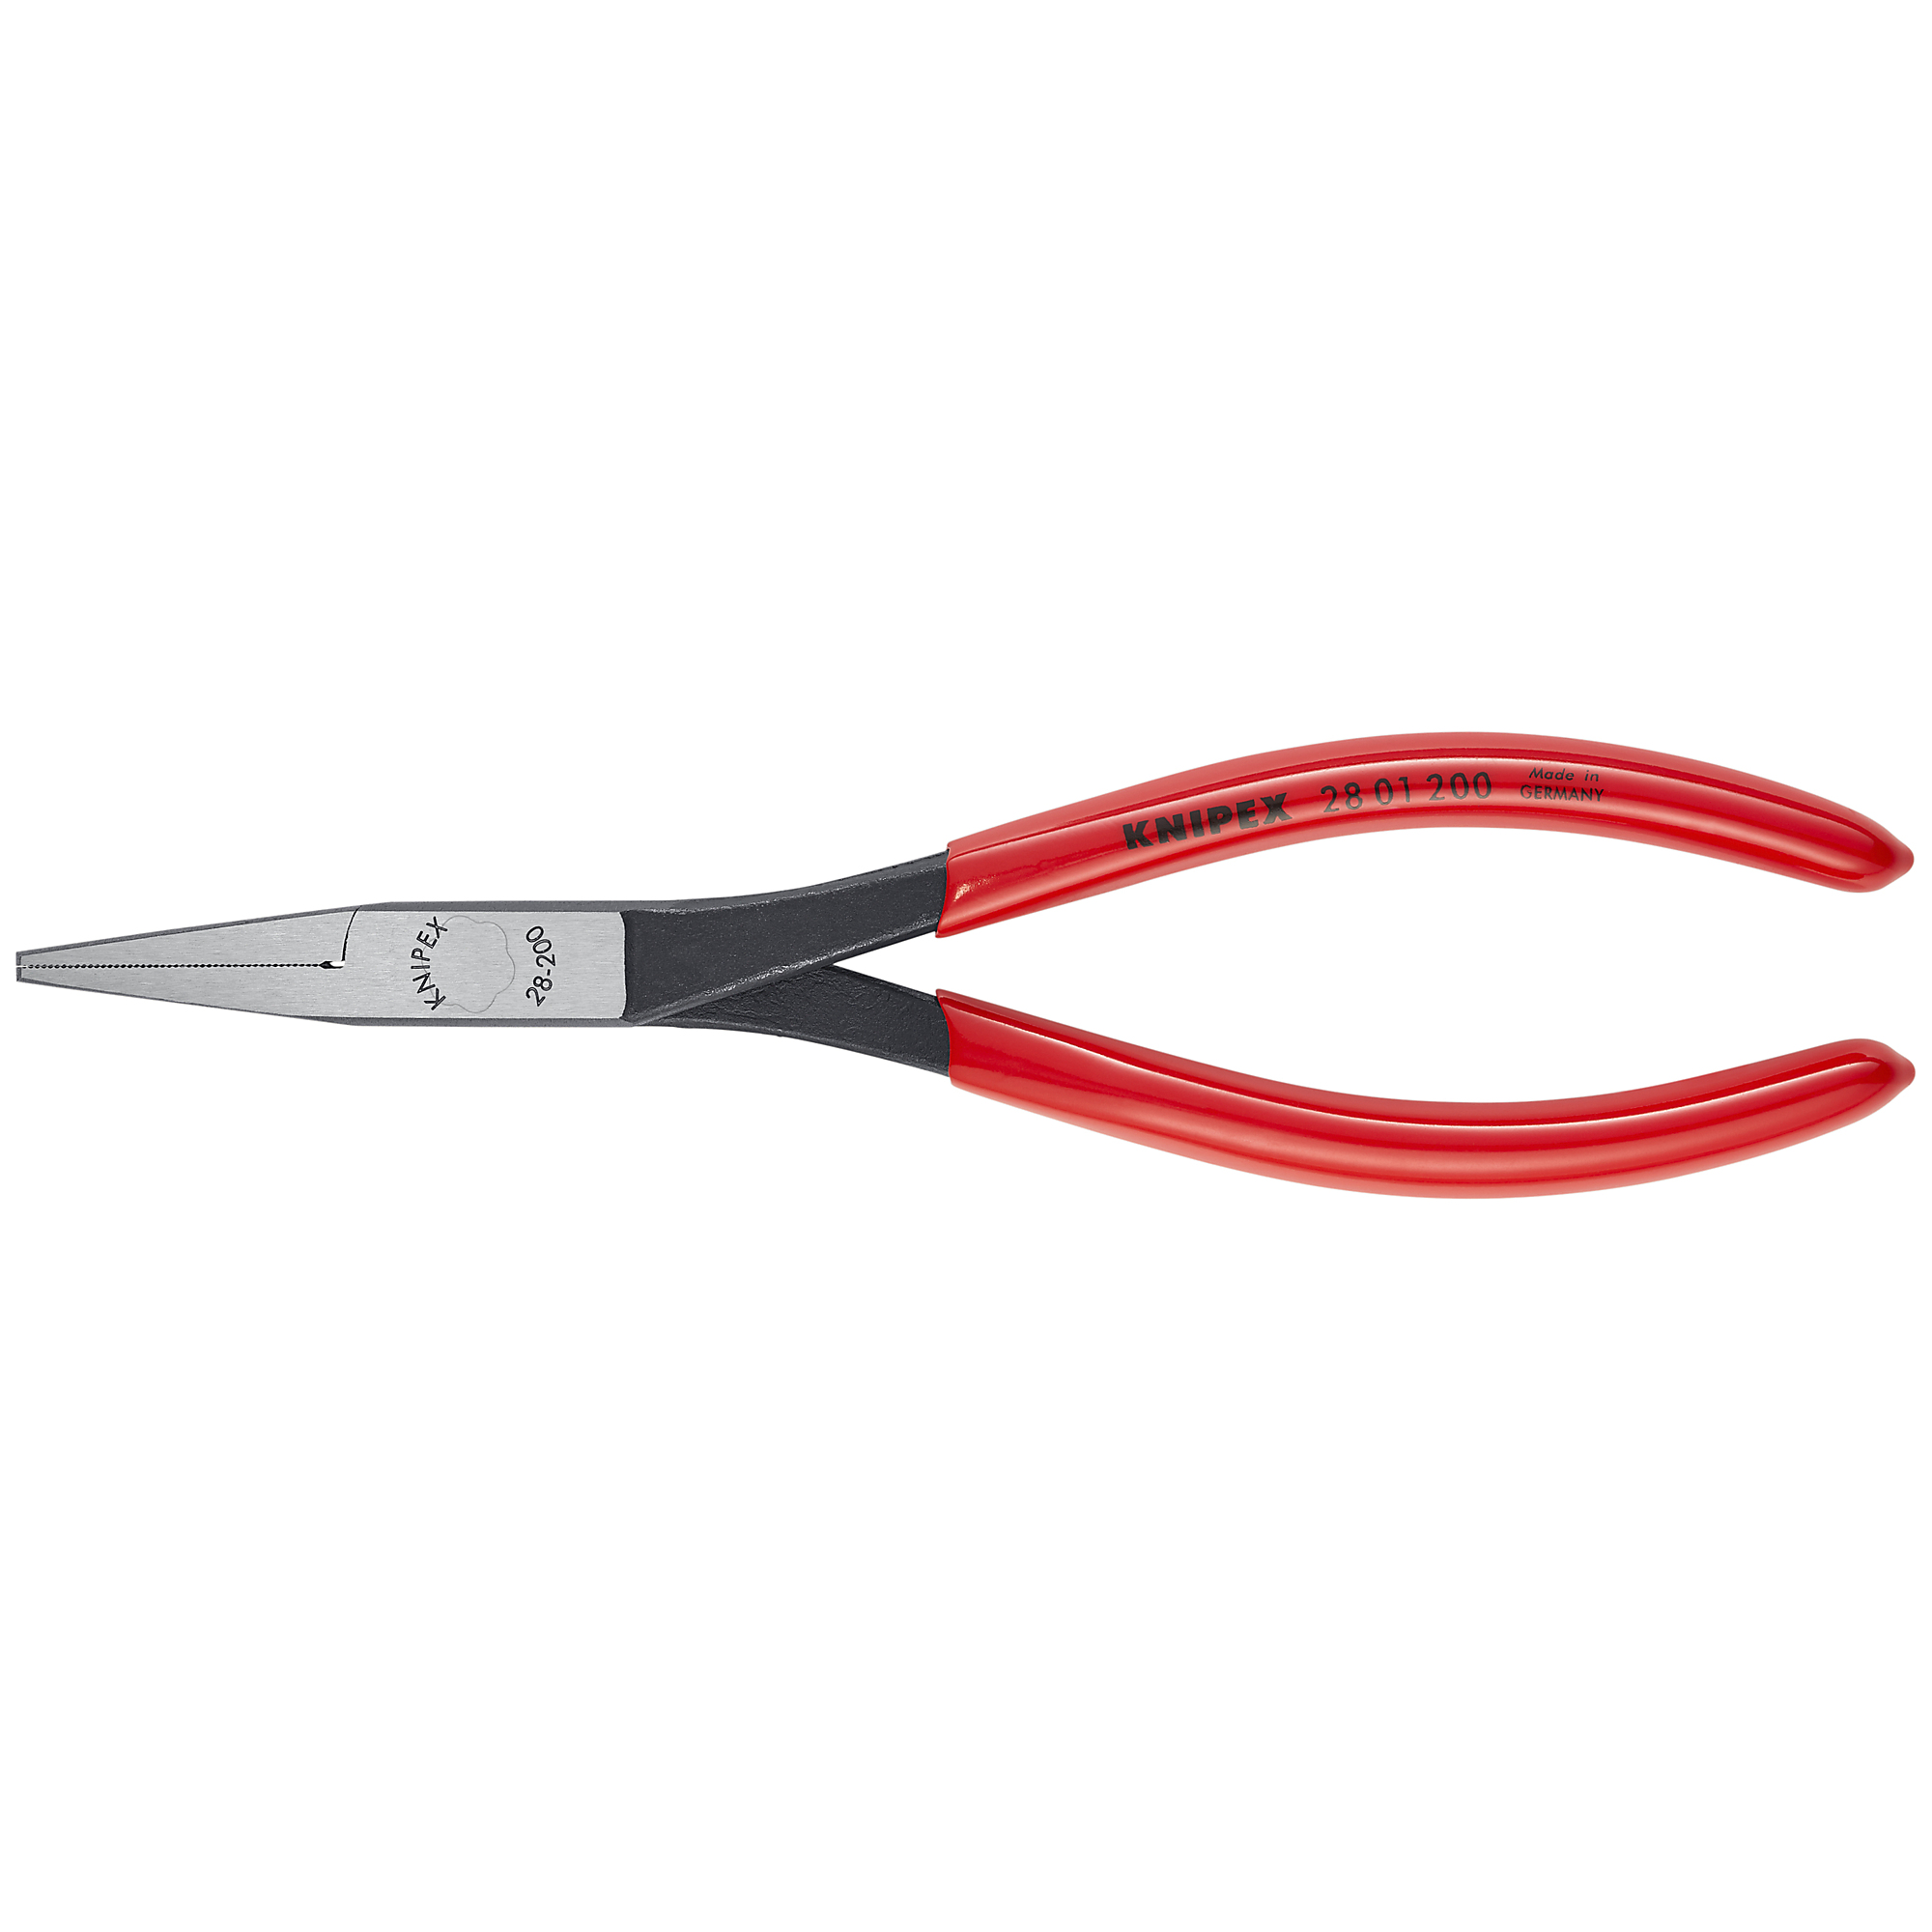 KNIPEX, Flat Nose Assembly Pliers, 8Inch, Pieces (qty.) 1 Material Steel, Model 28 01 200